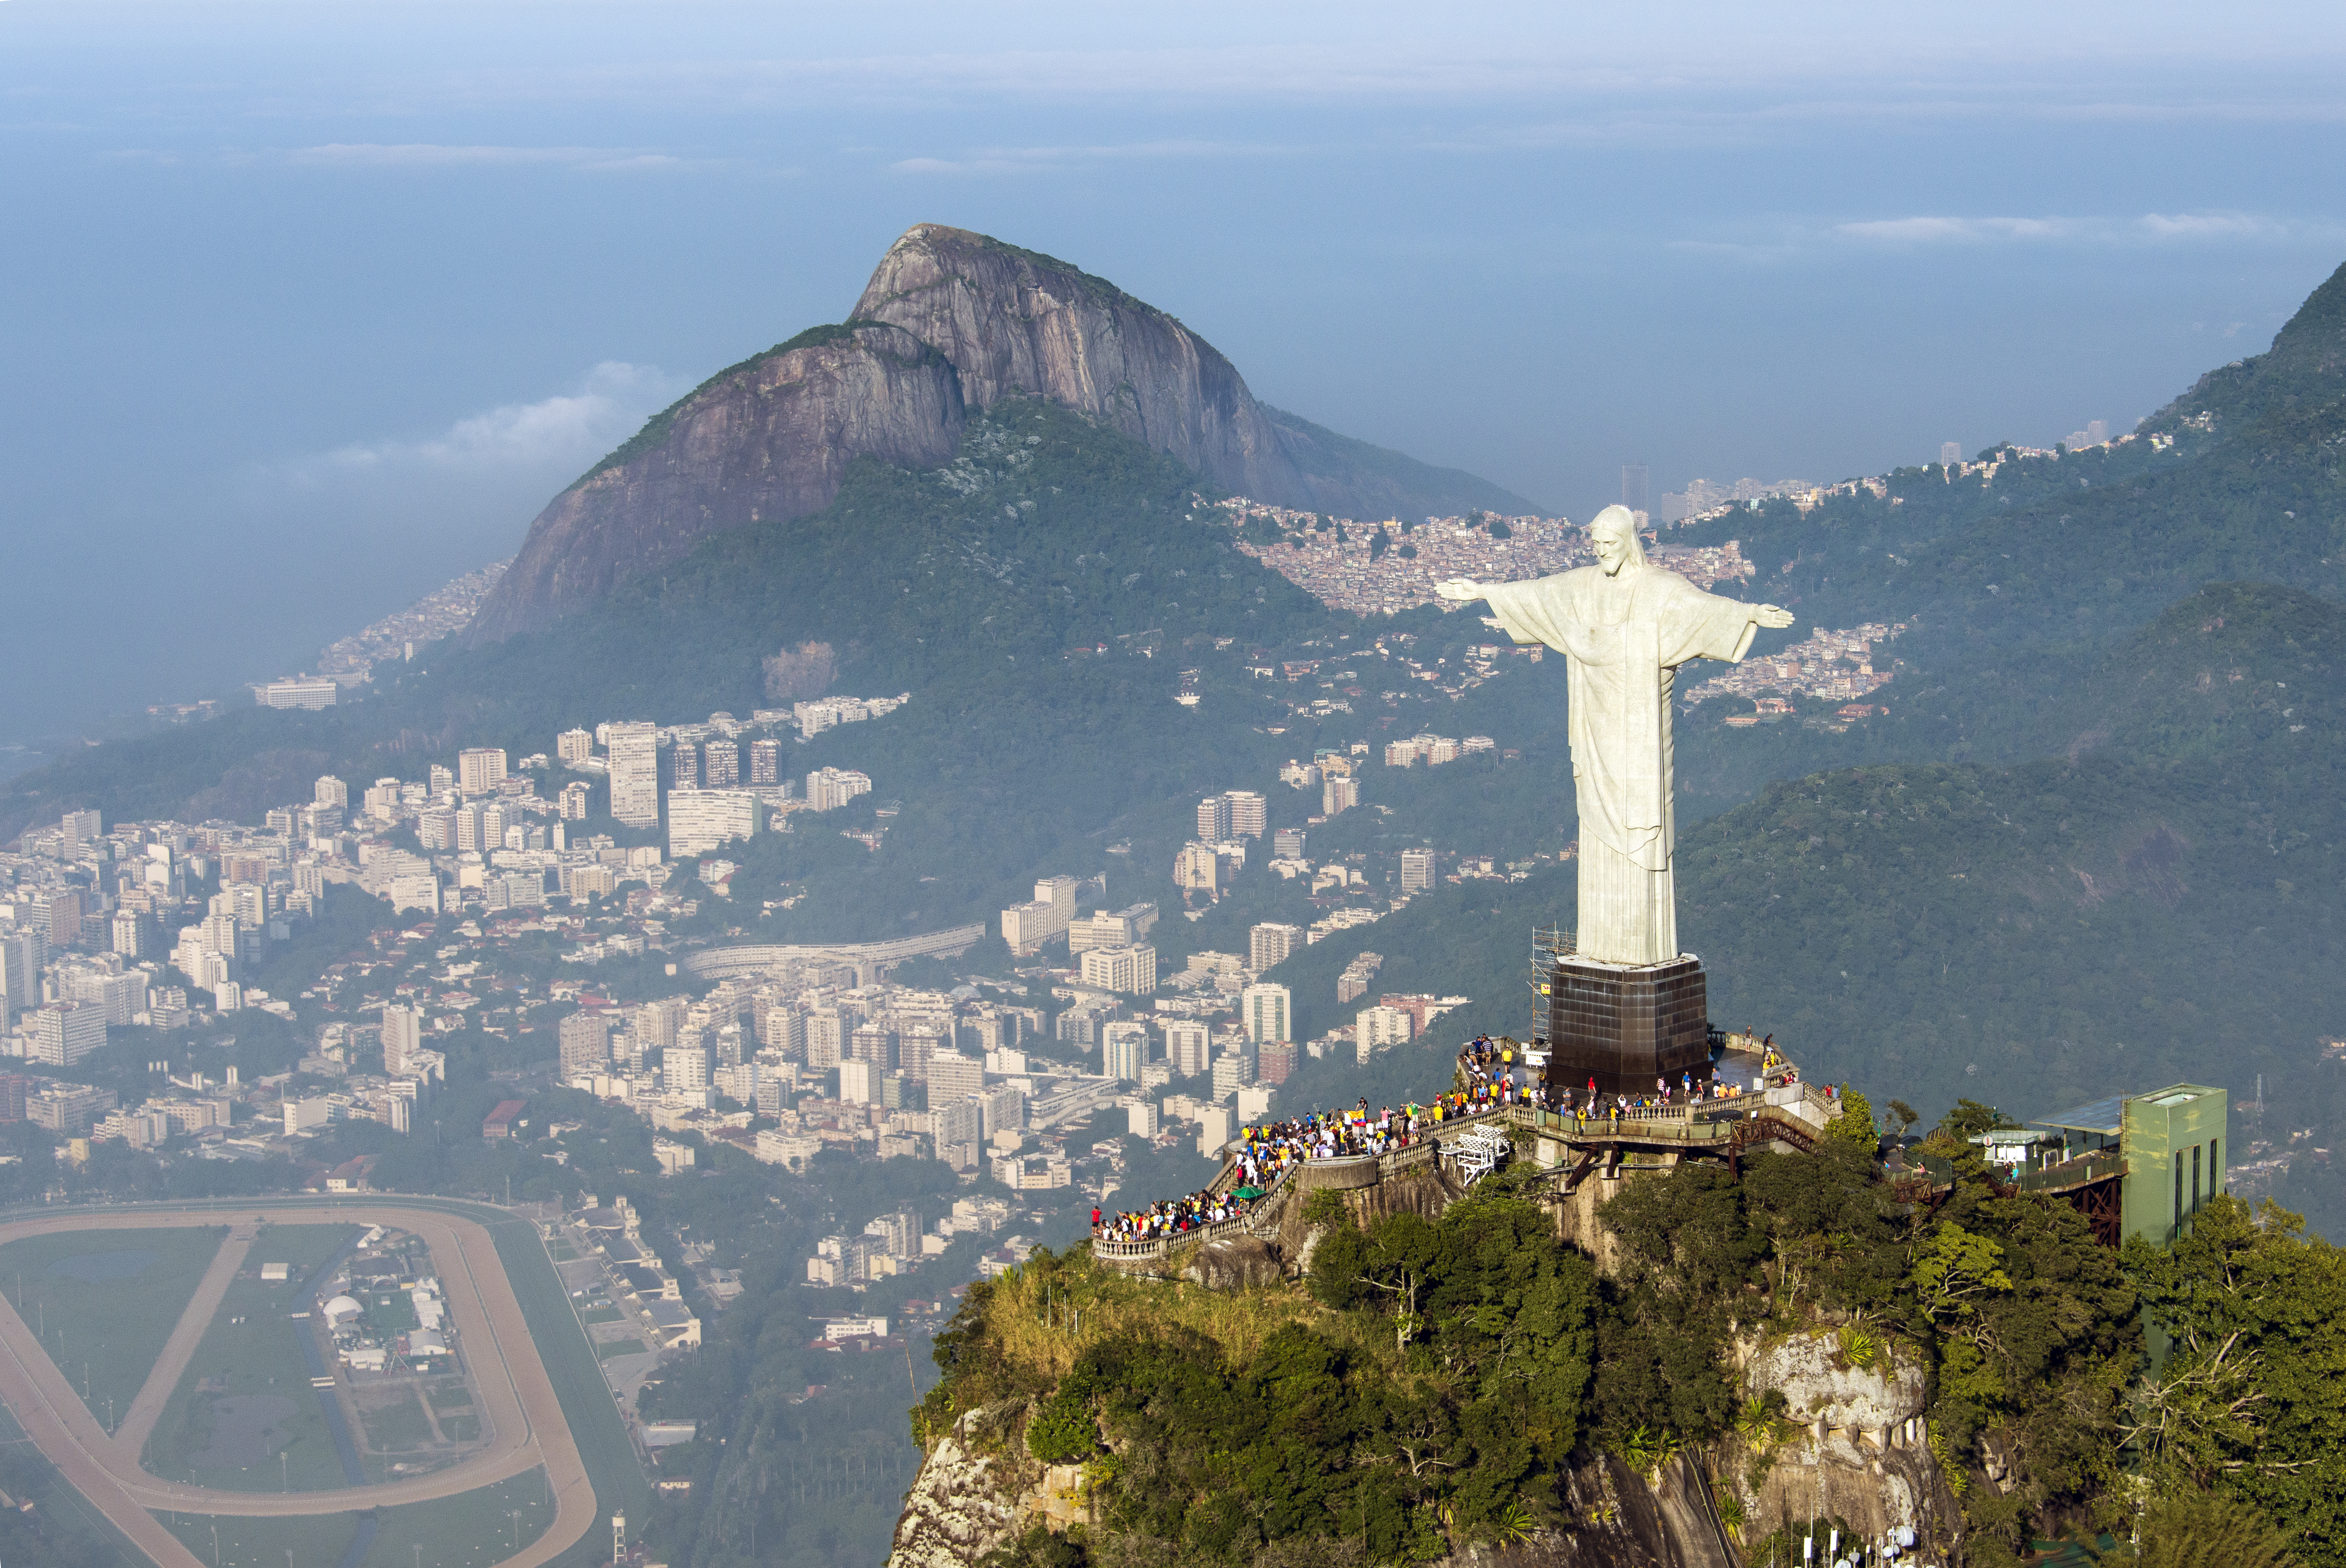 https://upload.wikimedia.org/wikipedia/commons/a/a1/1_cristor_redentor_2014.jpg